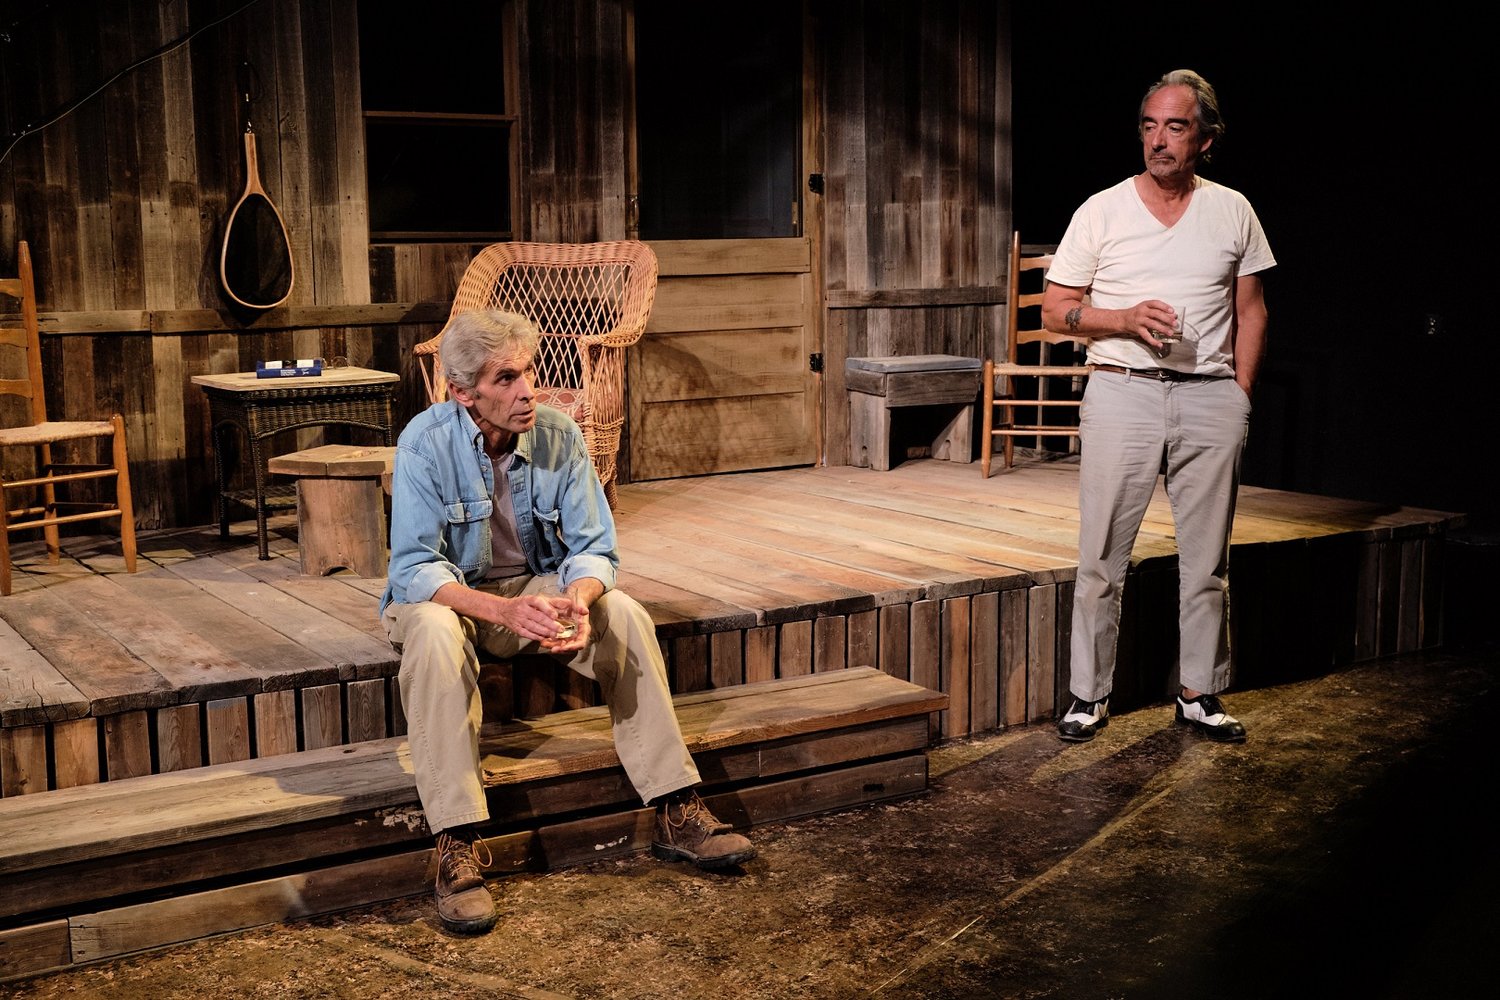 A picture of two men performing a scene from Ages Of The Moon By Sam Shepard at Teatro Paraguas Theater, Santa Fe, New Mexico. The men are in front of a wood house. The man on the left is sitting on the porch steps, while the man on the right, holding a glass, is looking at him.